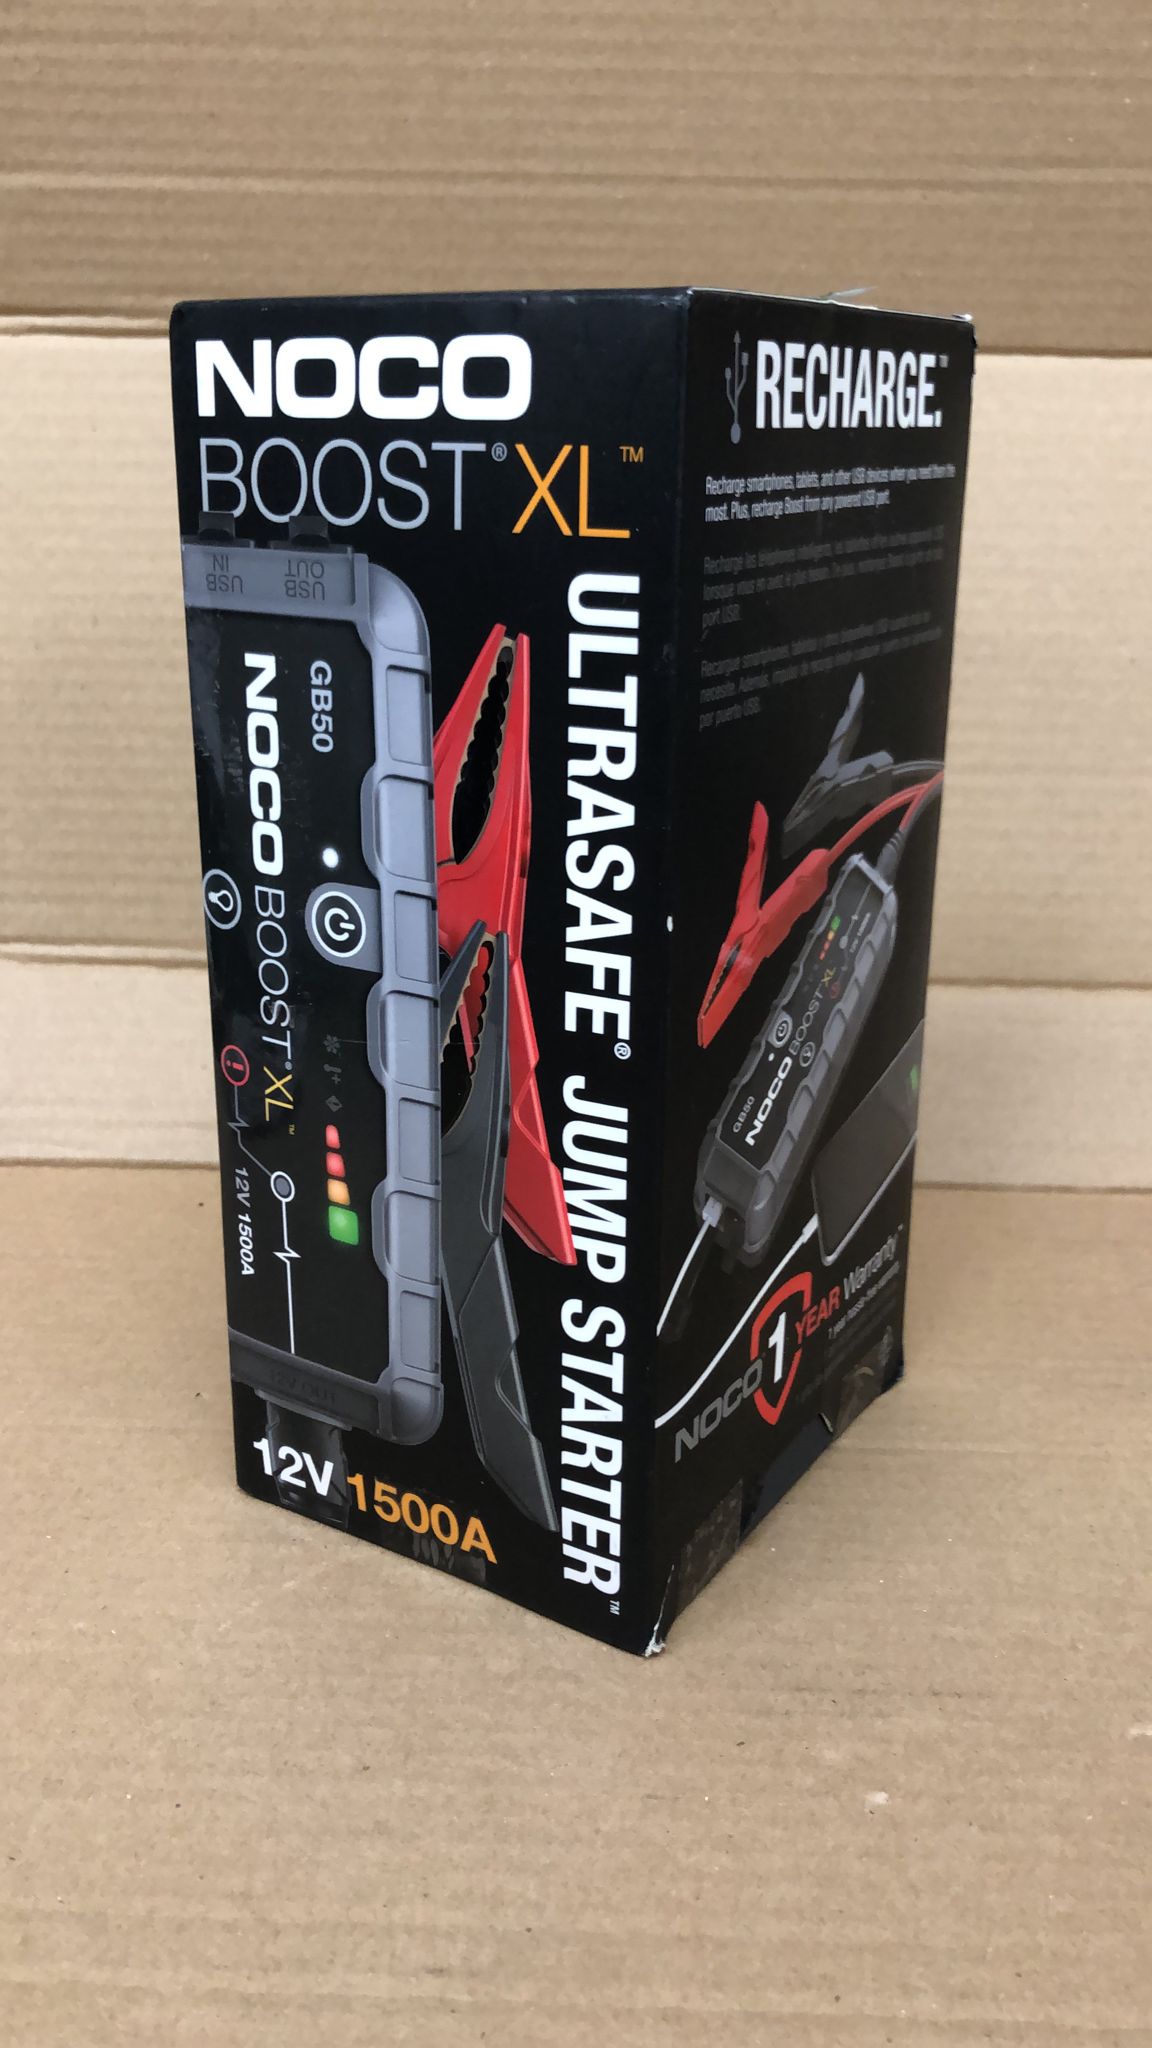 NOCO Boost XL GB50 1500A 12V UltraSafe Portable Lithium Car Jump Starter, Heavy-Duty Battery Booster Power Pack, Powerbank Charger, and Jump Leads for up to 7.0L Petrol and 4.5L Diesel Engines  8177